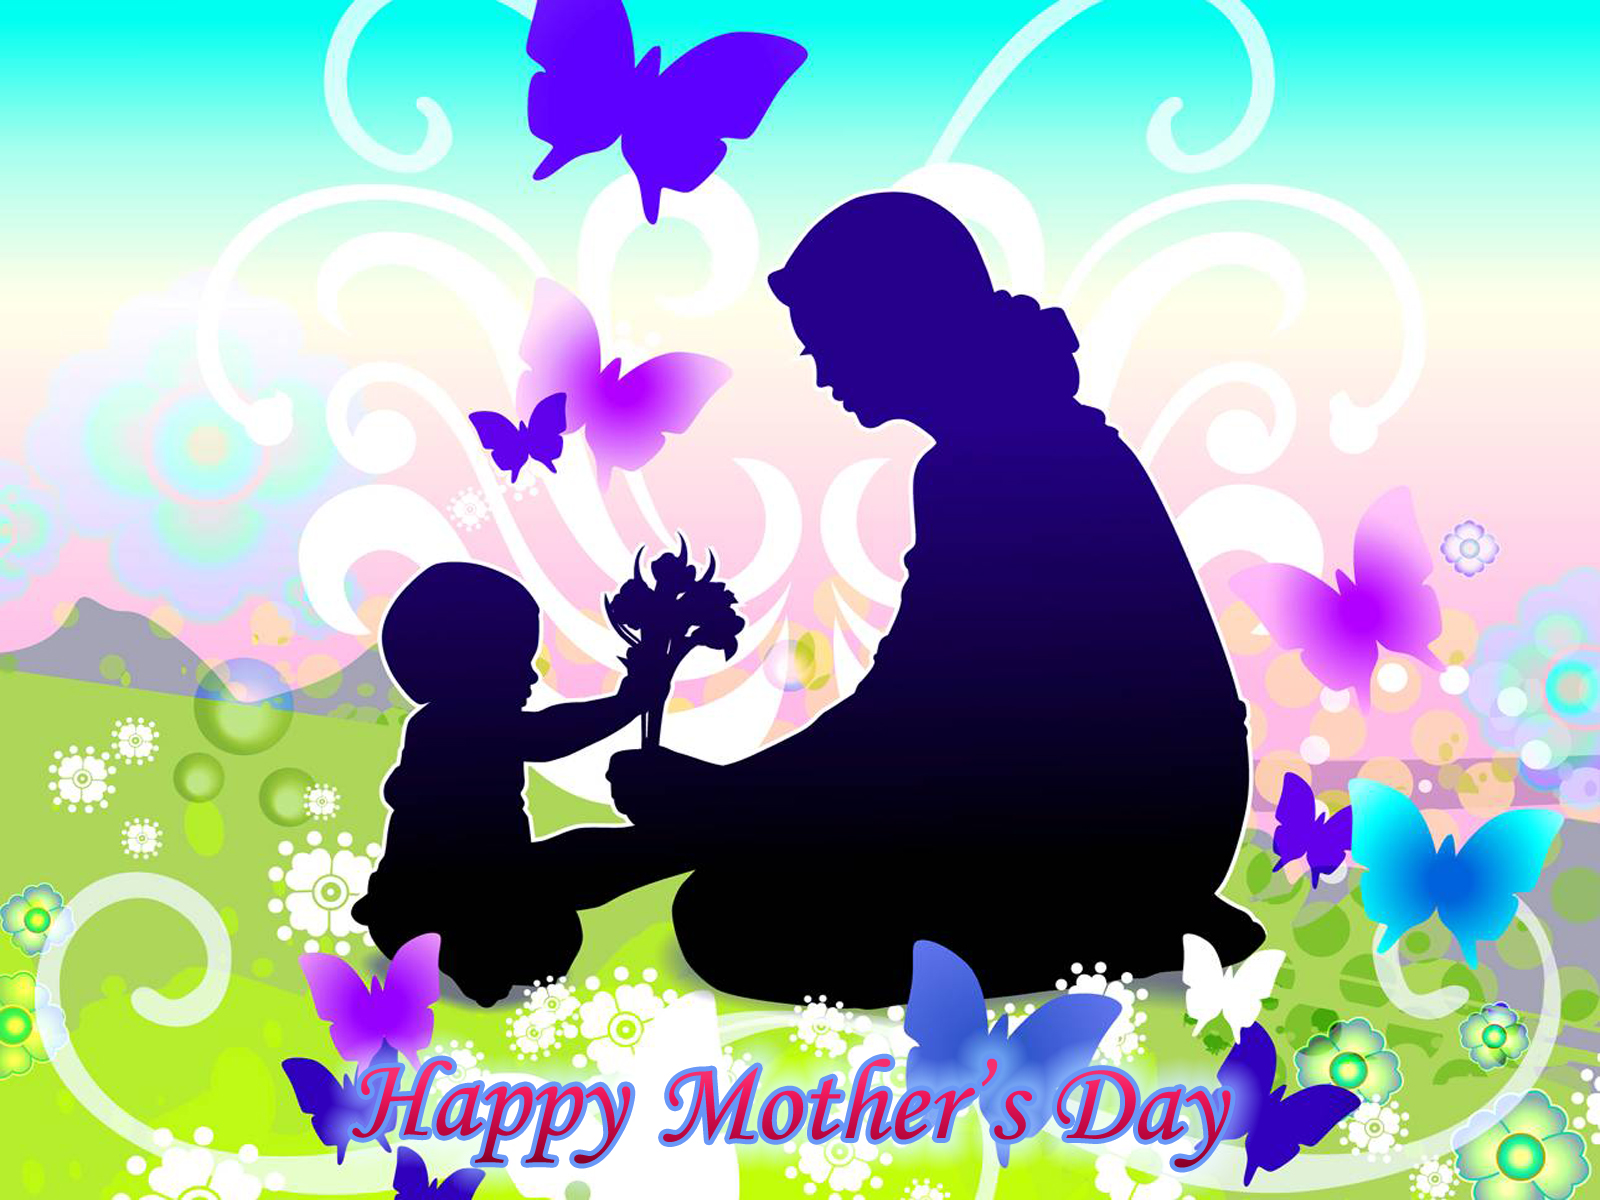 50+ Happy Mother’s Day Wishes and Mothers Day Greeting